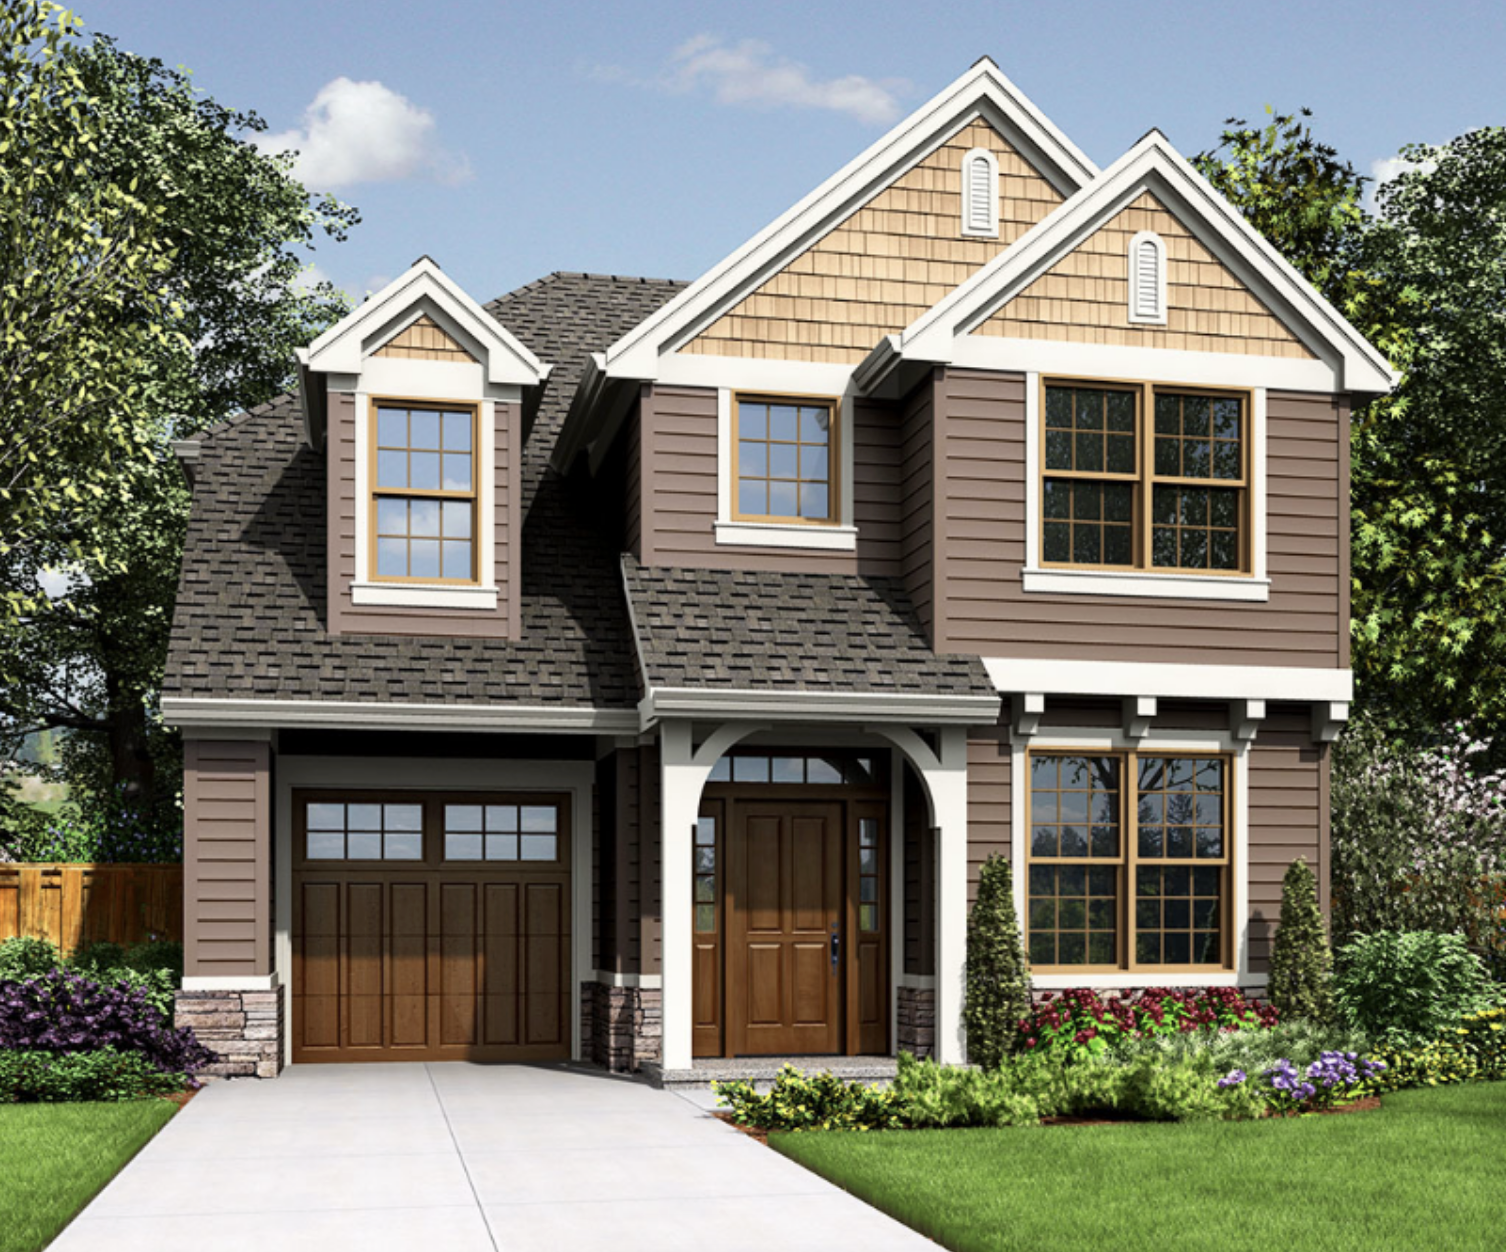 A rendering of a home to be built as part of a four-home development in Brick's Nejecho Beach neighborhood. (Source: Planning Documents)